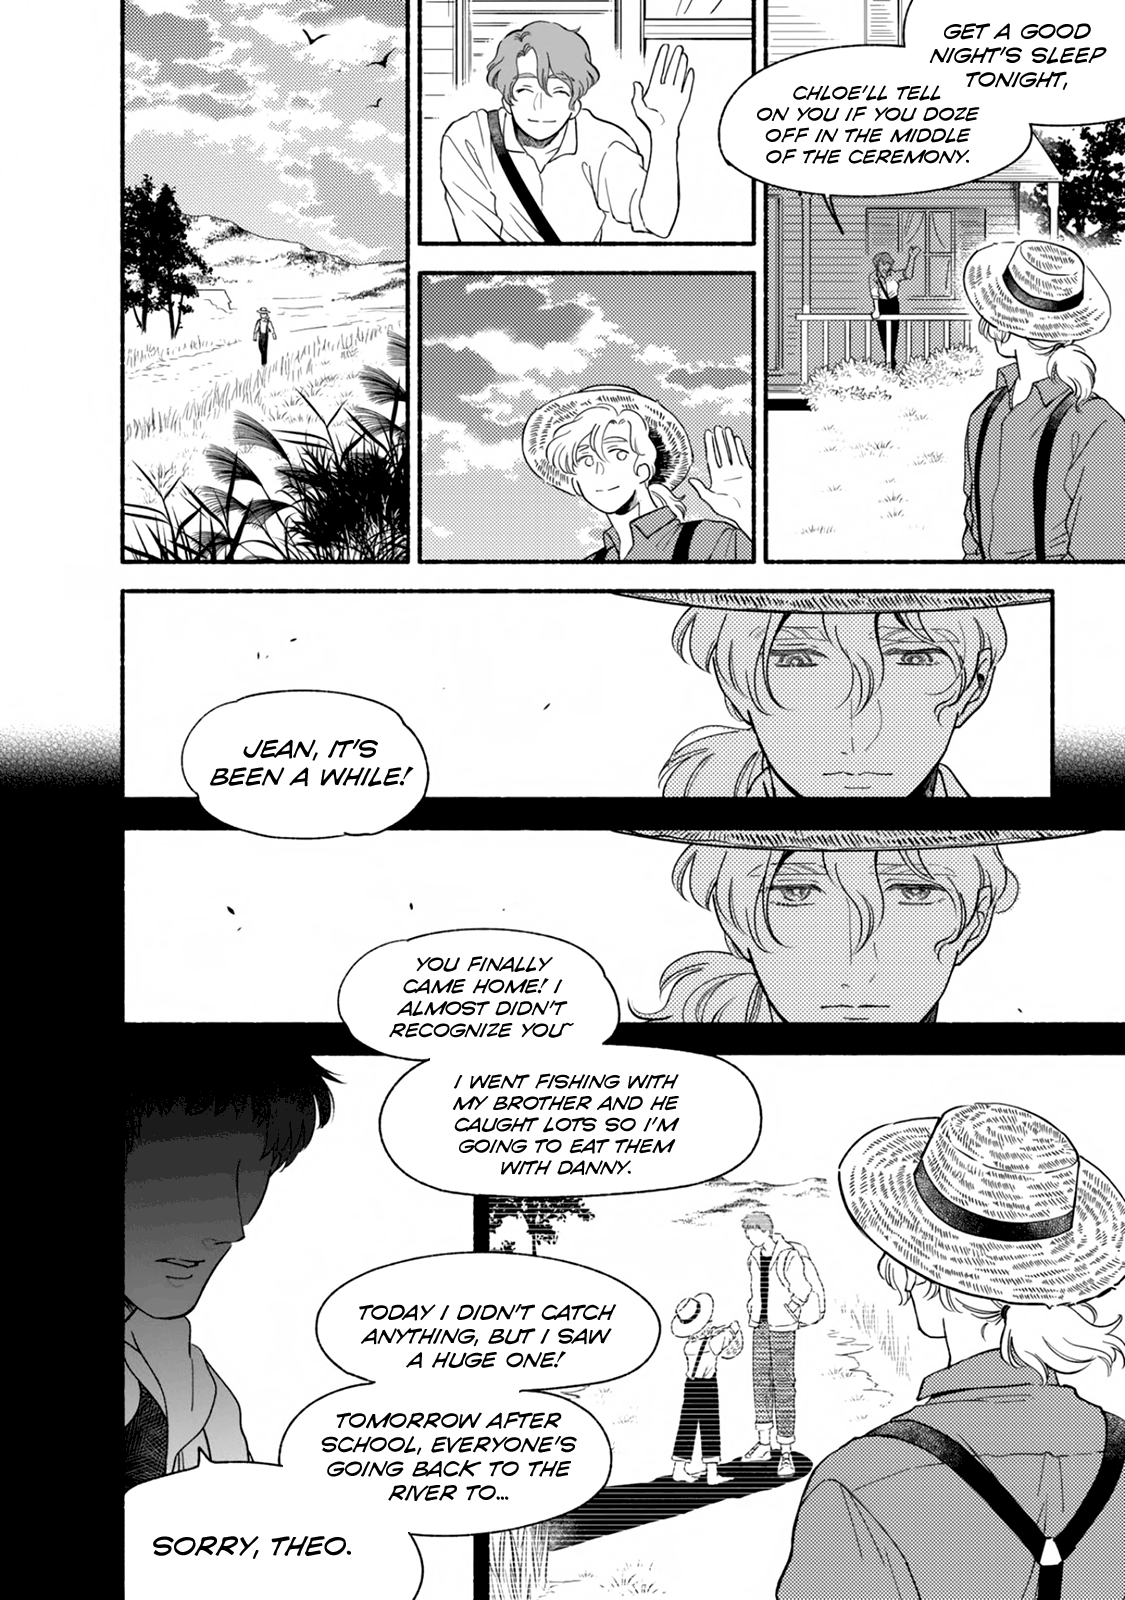 Rumspringa No Joukei Vol.1 Chapter 5 - Picture 3